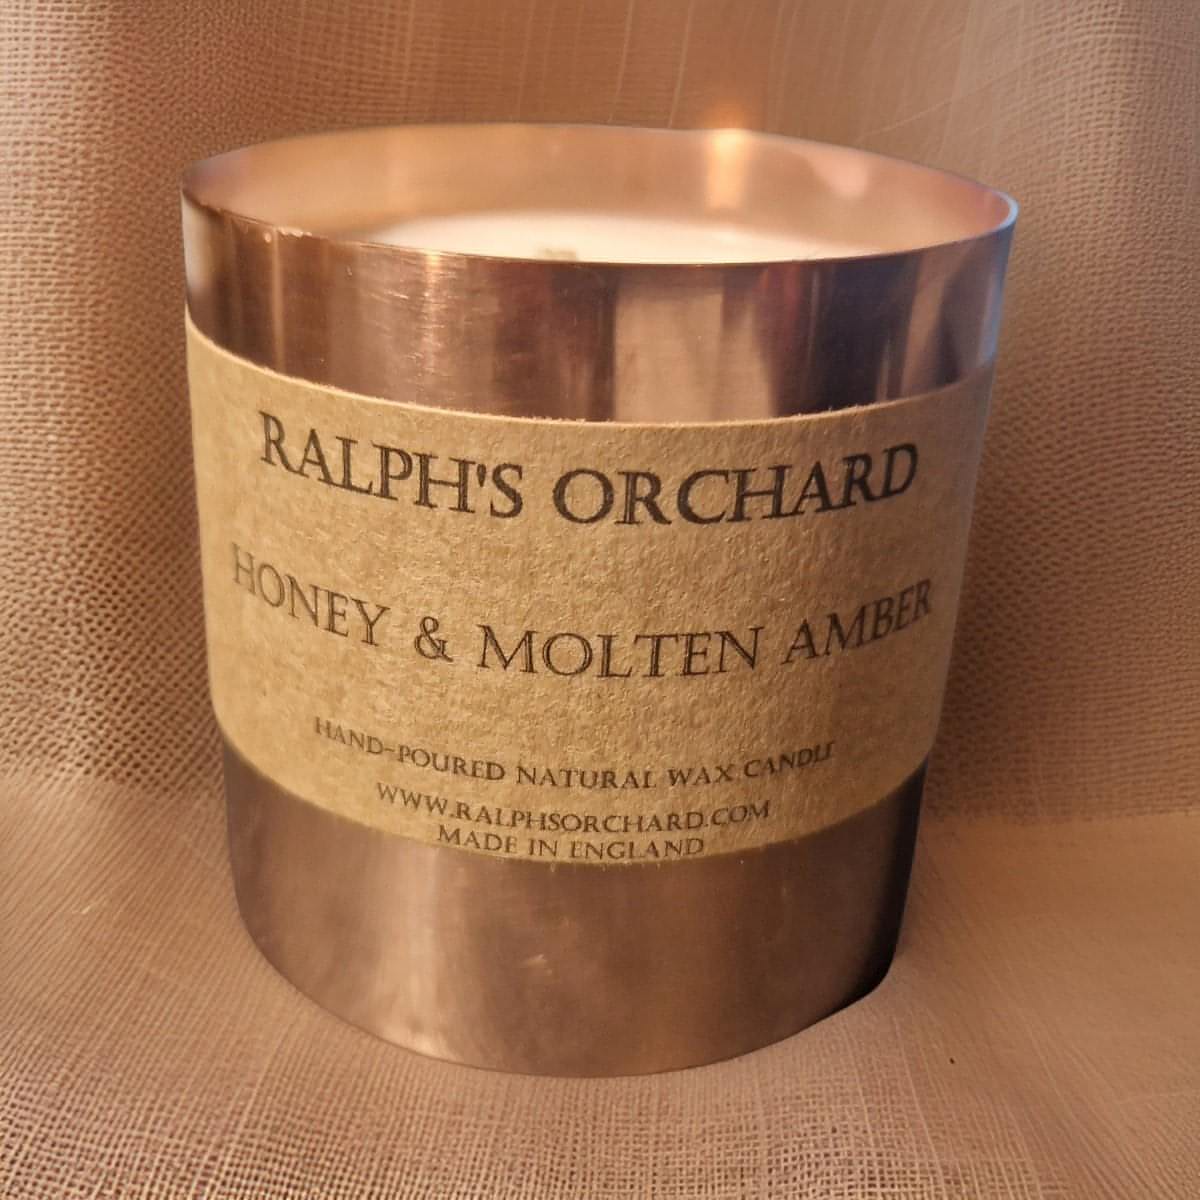 Honey & Molten Amber Scented Soy Candle